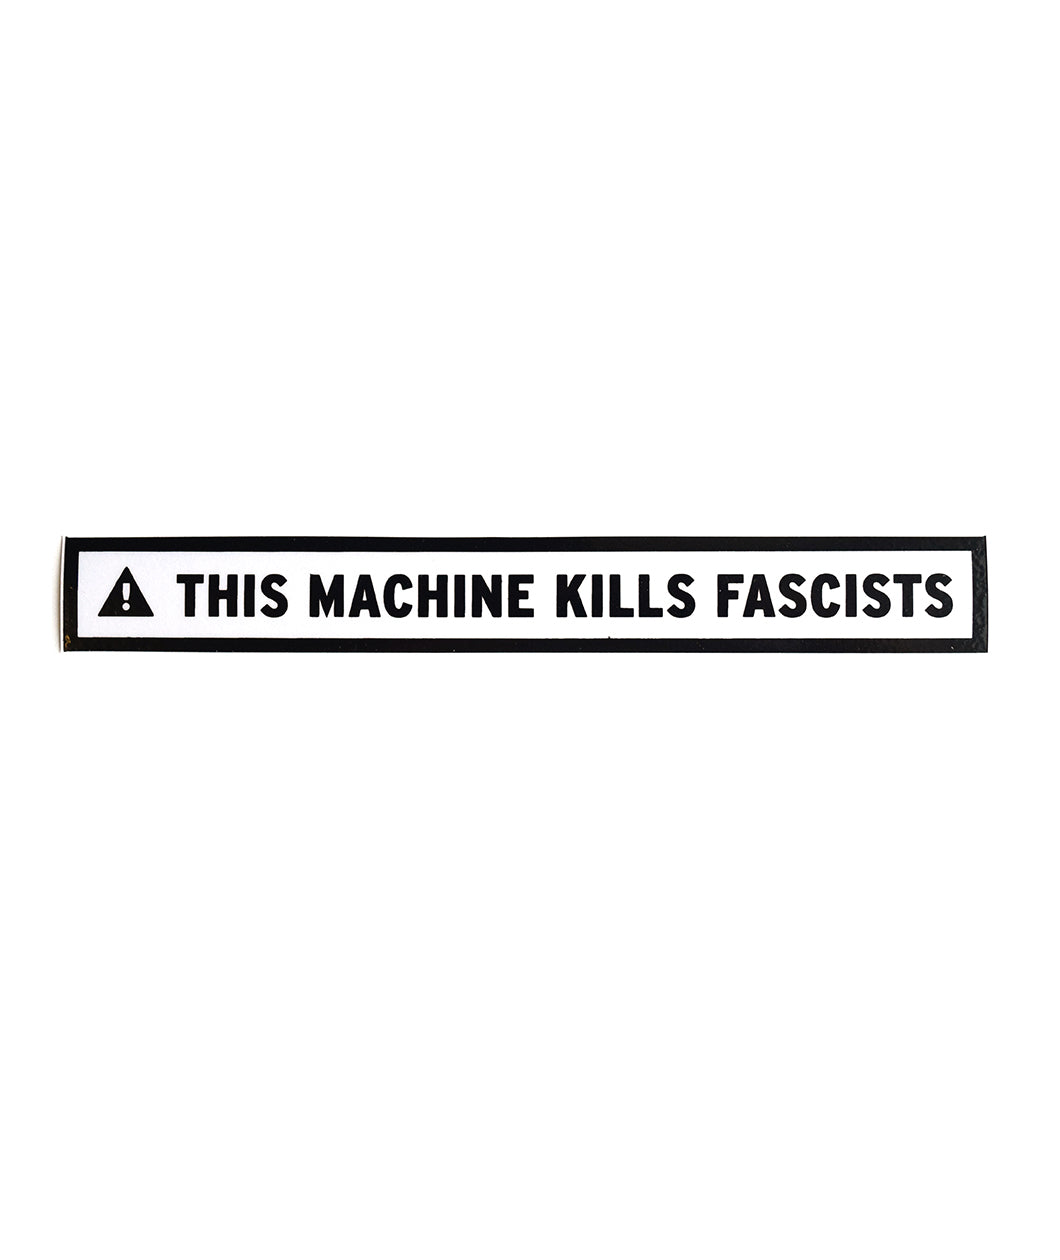 Long rectangular sticker with black border surrounding a black triangle with an exclamation point in the center of it followed by “This Machine Kills Fascists” in black, sans serif font - from John Green